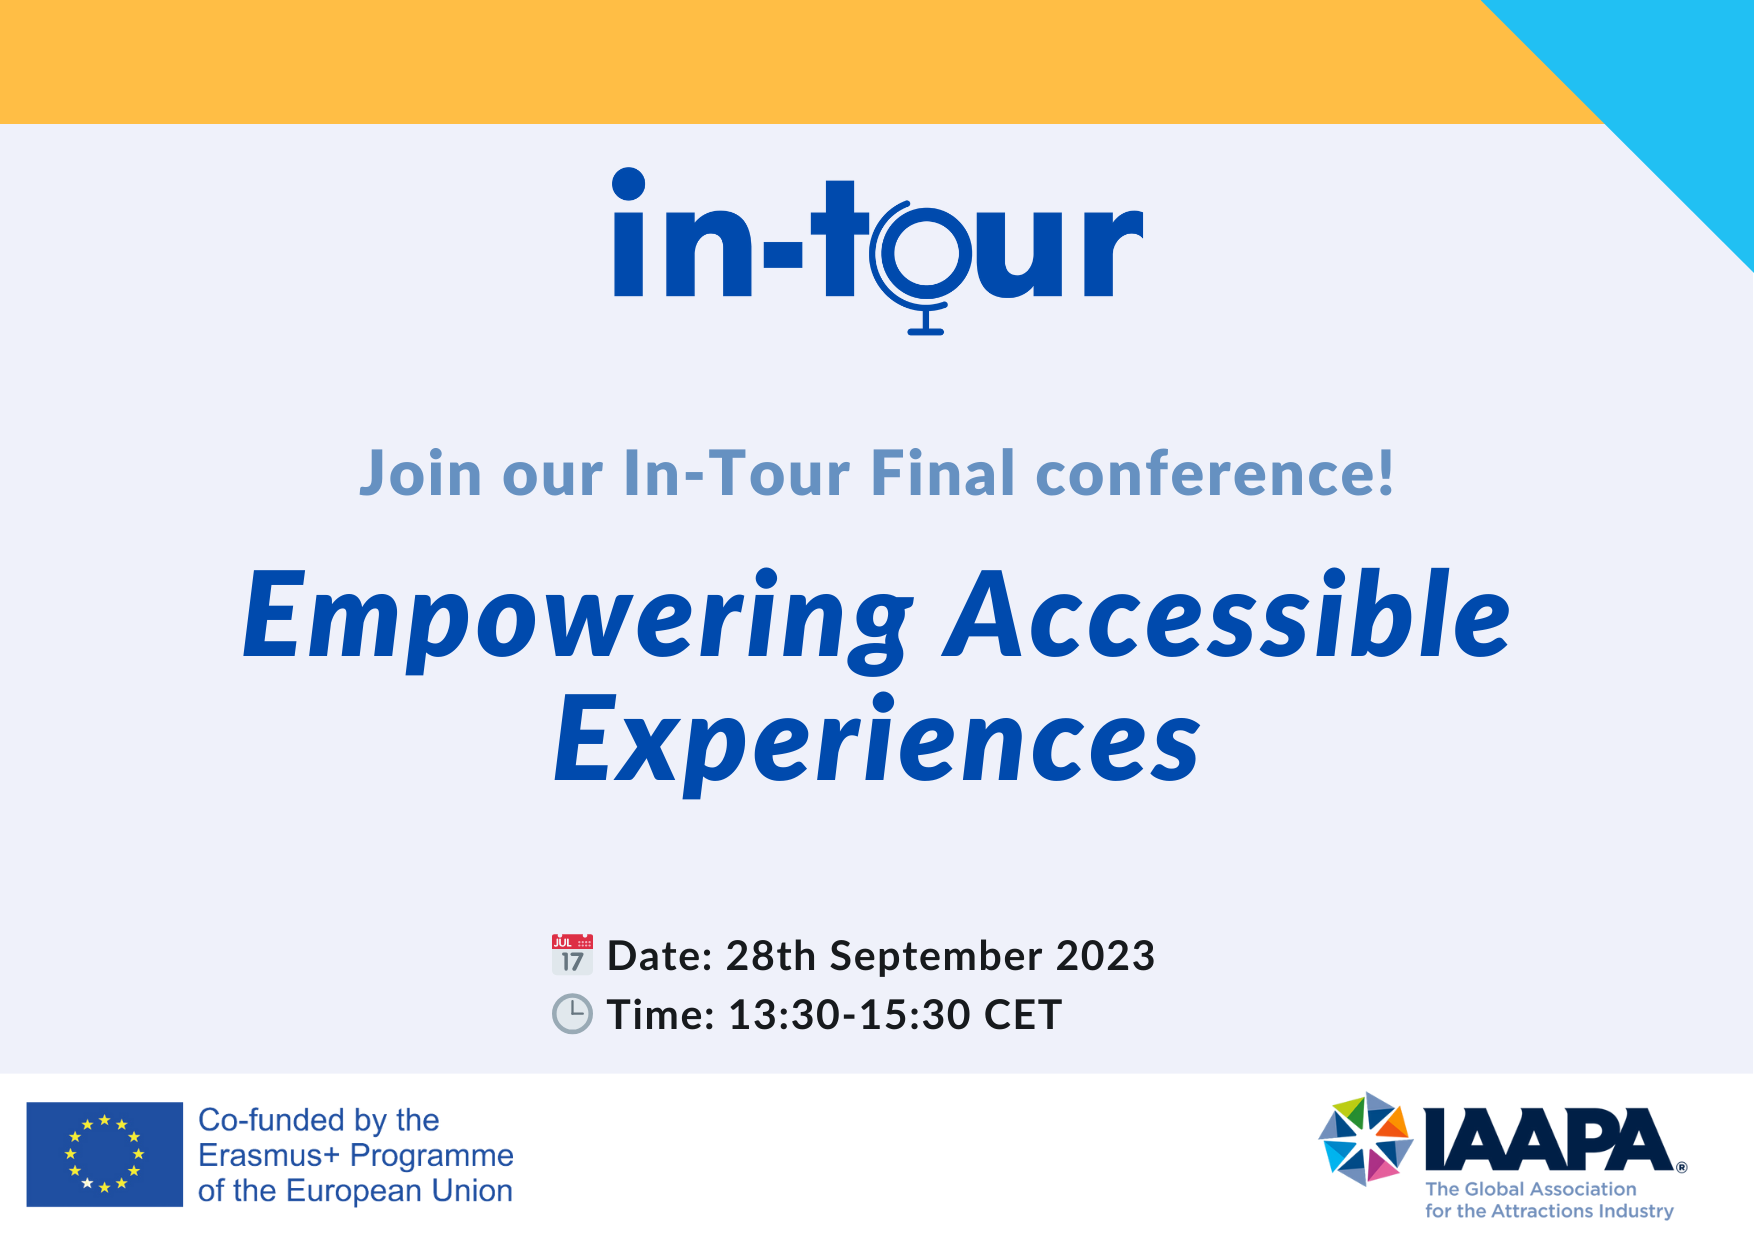 in-tour, join our in-tour final conference